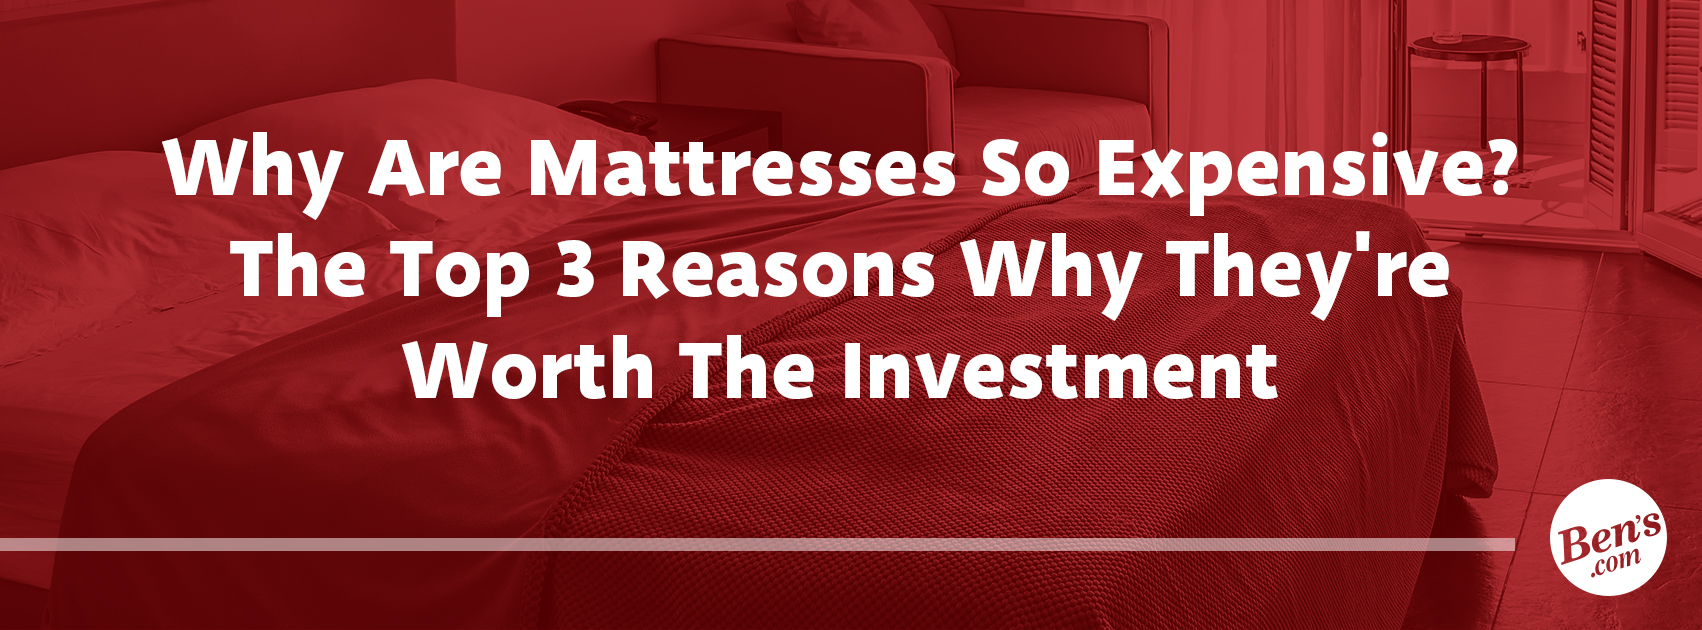 06-12_Why_Are_Mattresses